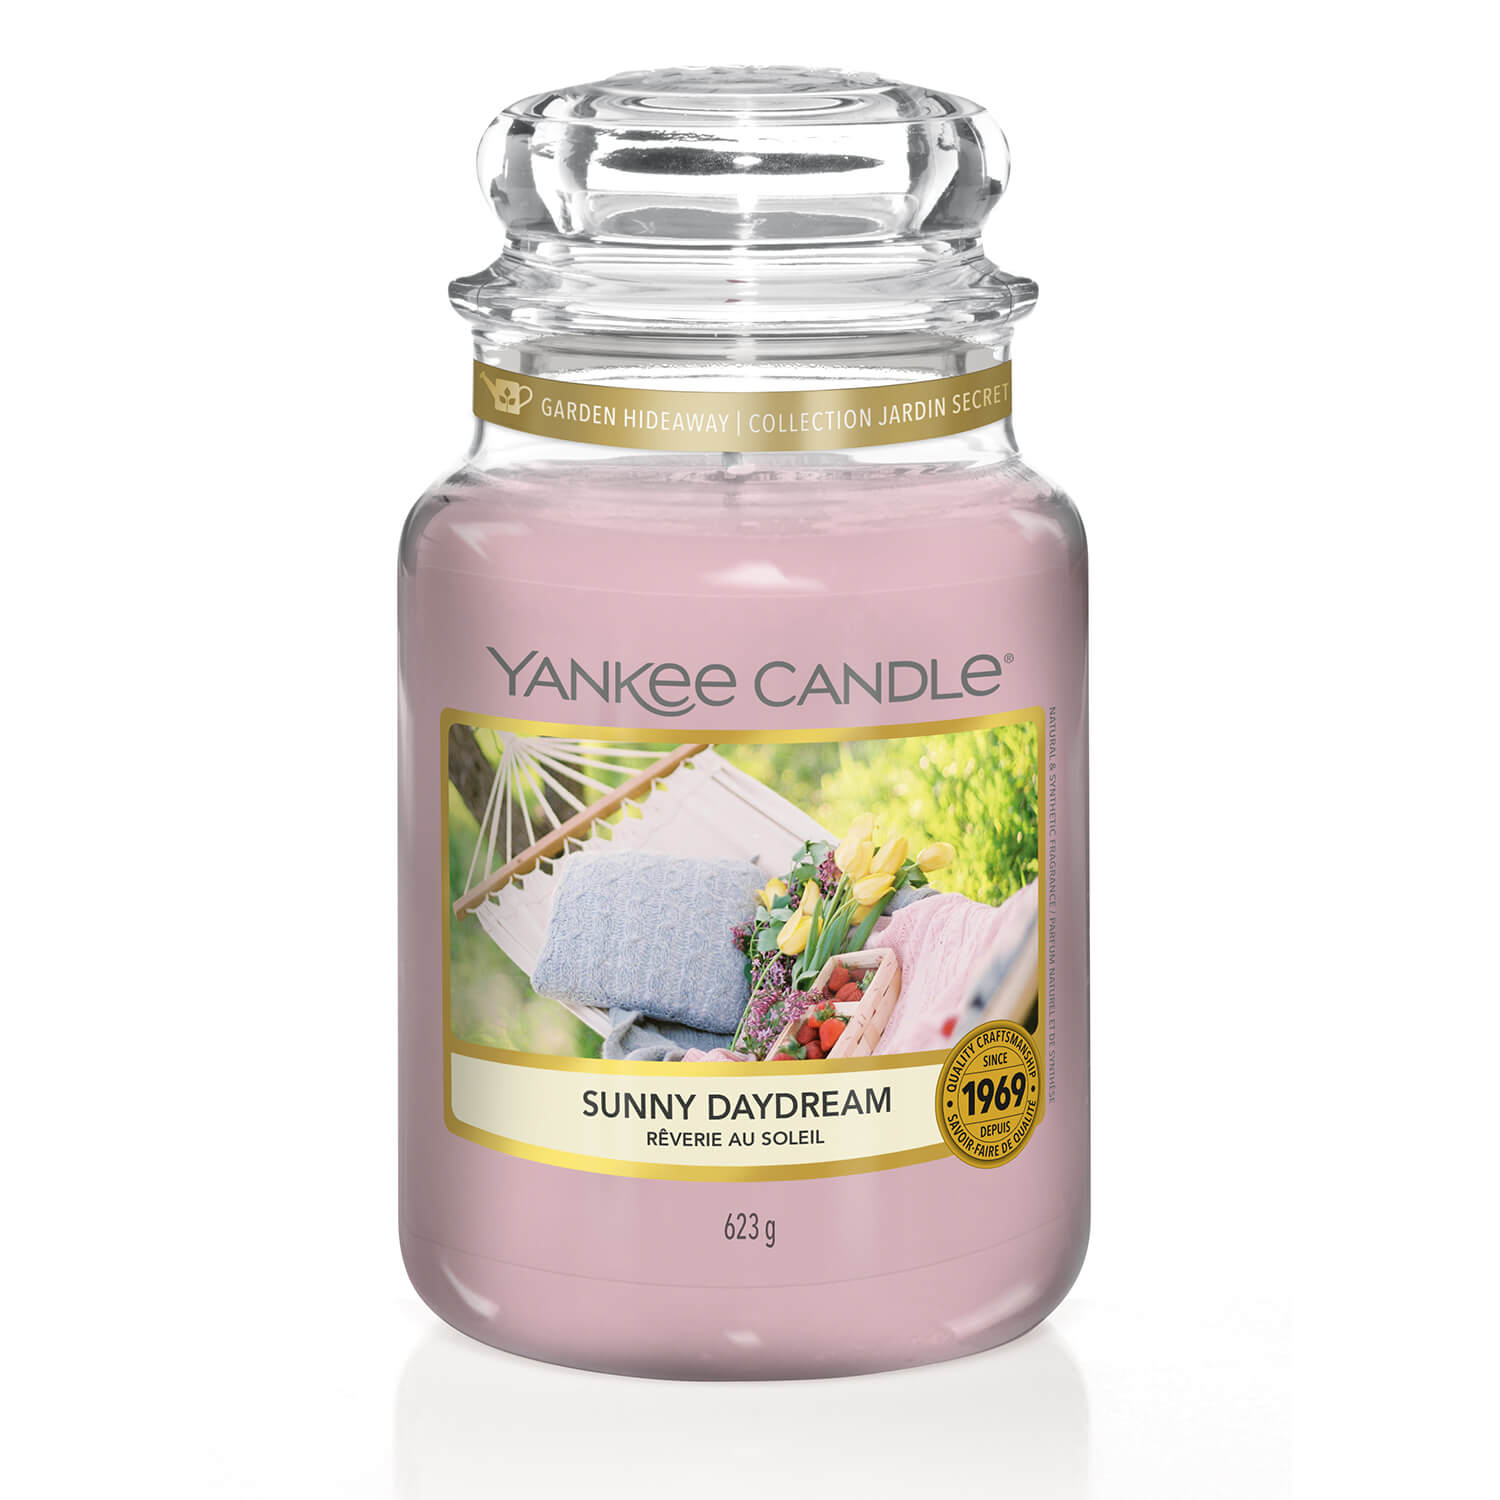 Yankee Candle, Home Frangrance, Candles, Giftsets